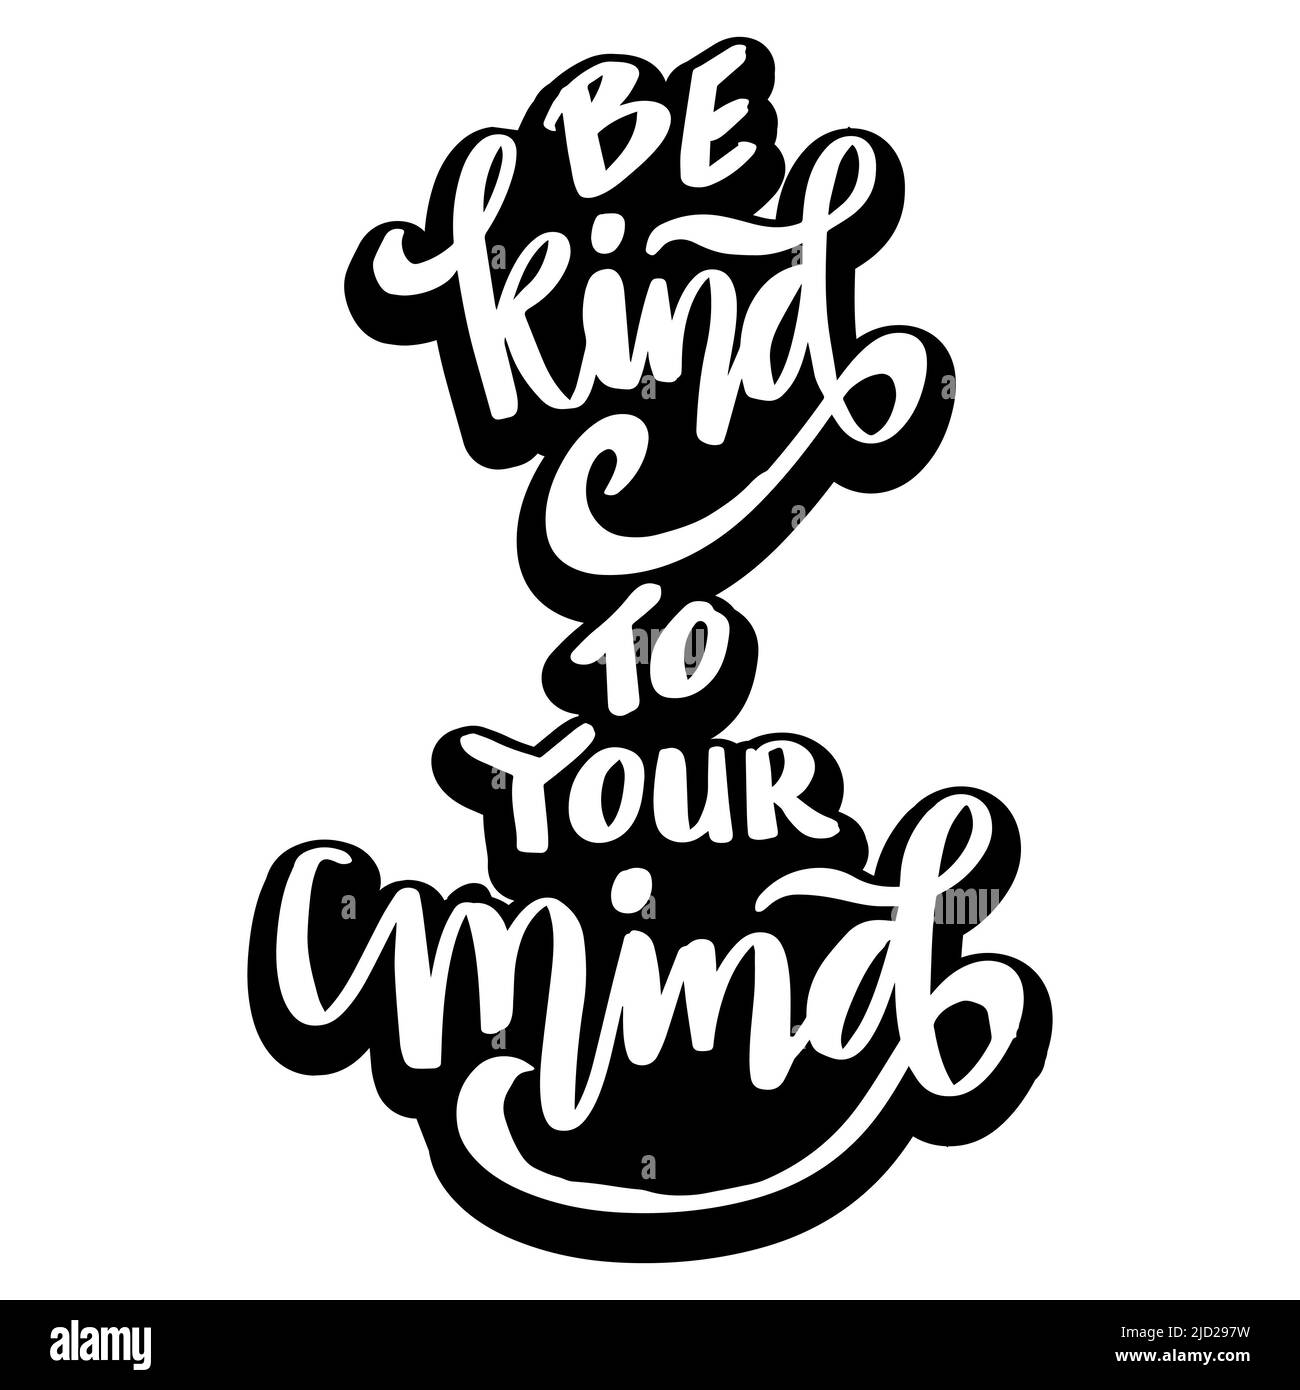 Be kind to your mind hand lettering. Poster quotes. Stock Photo